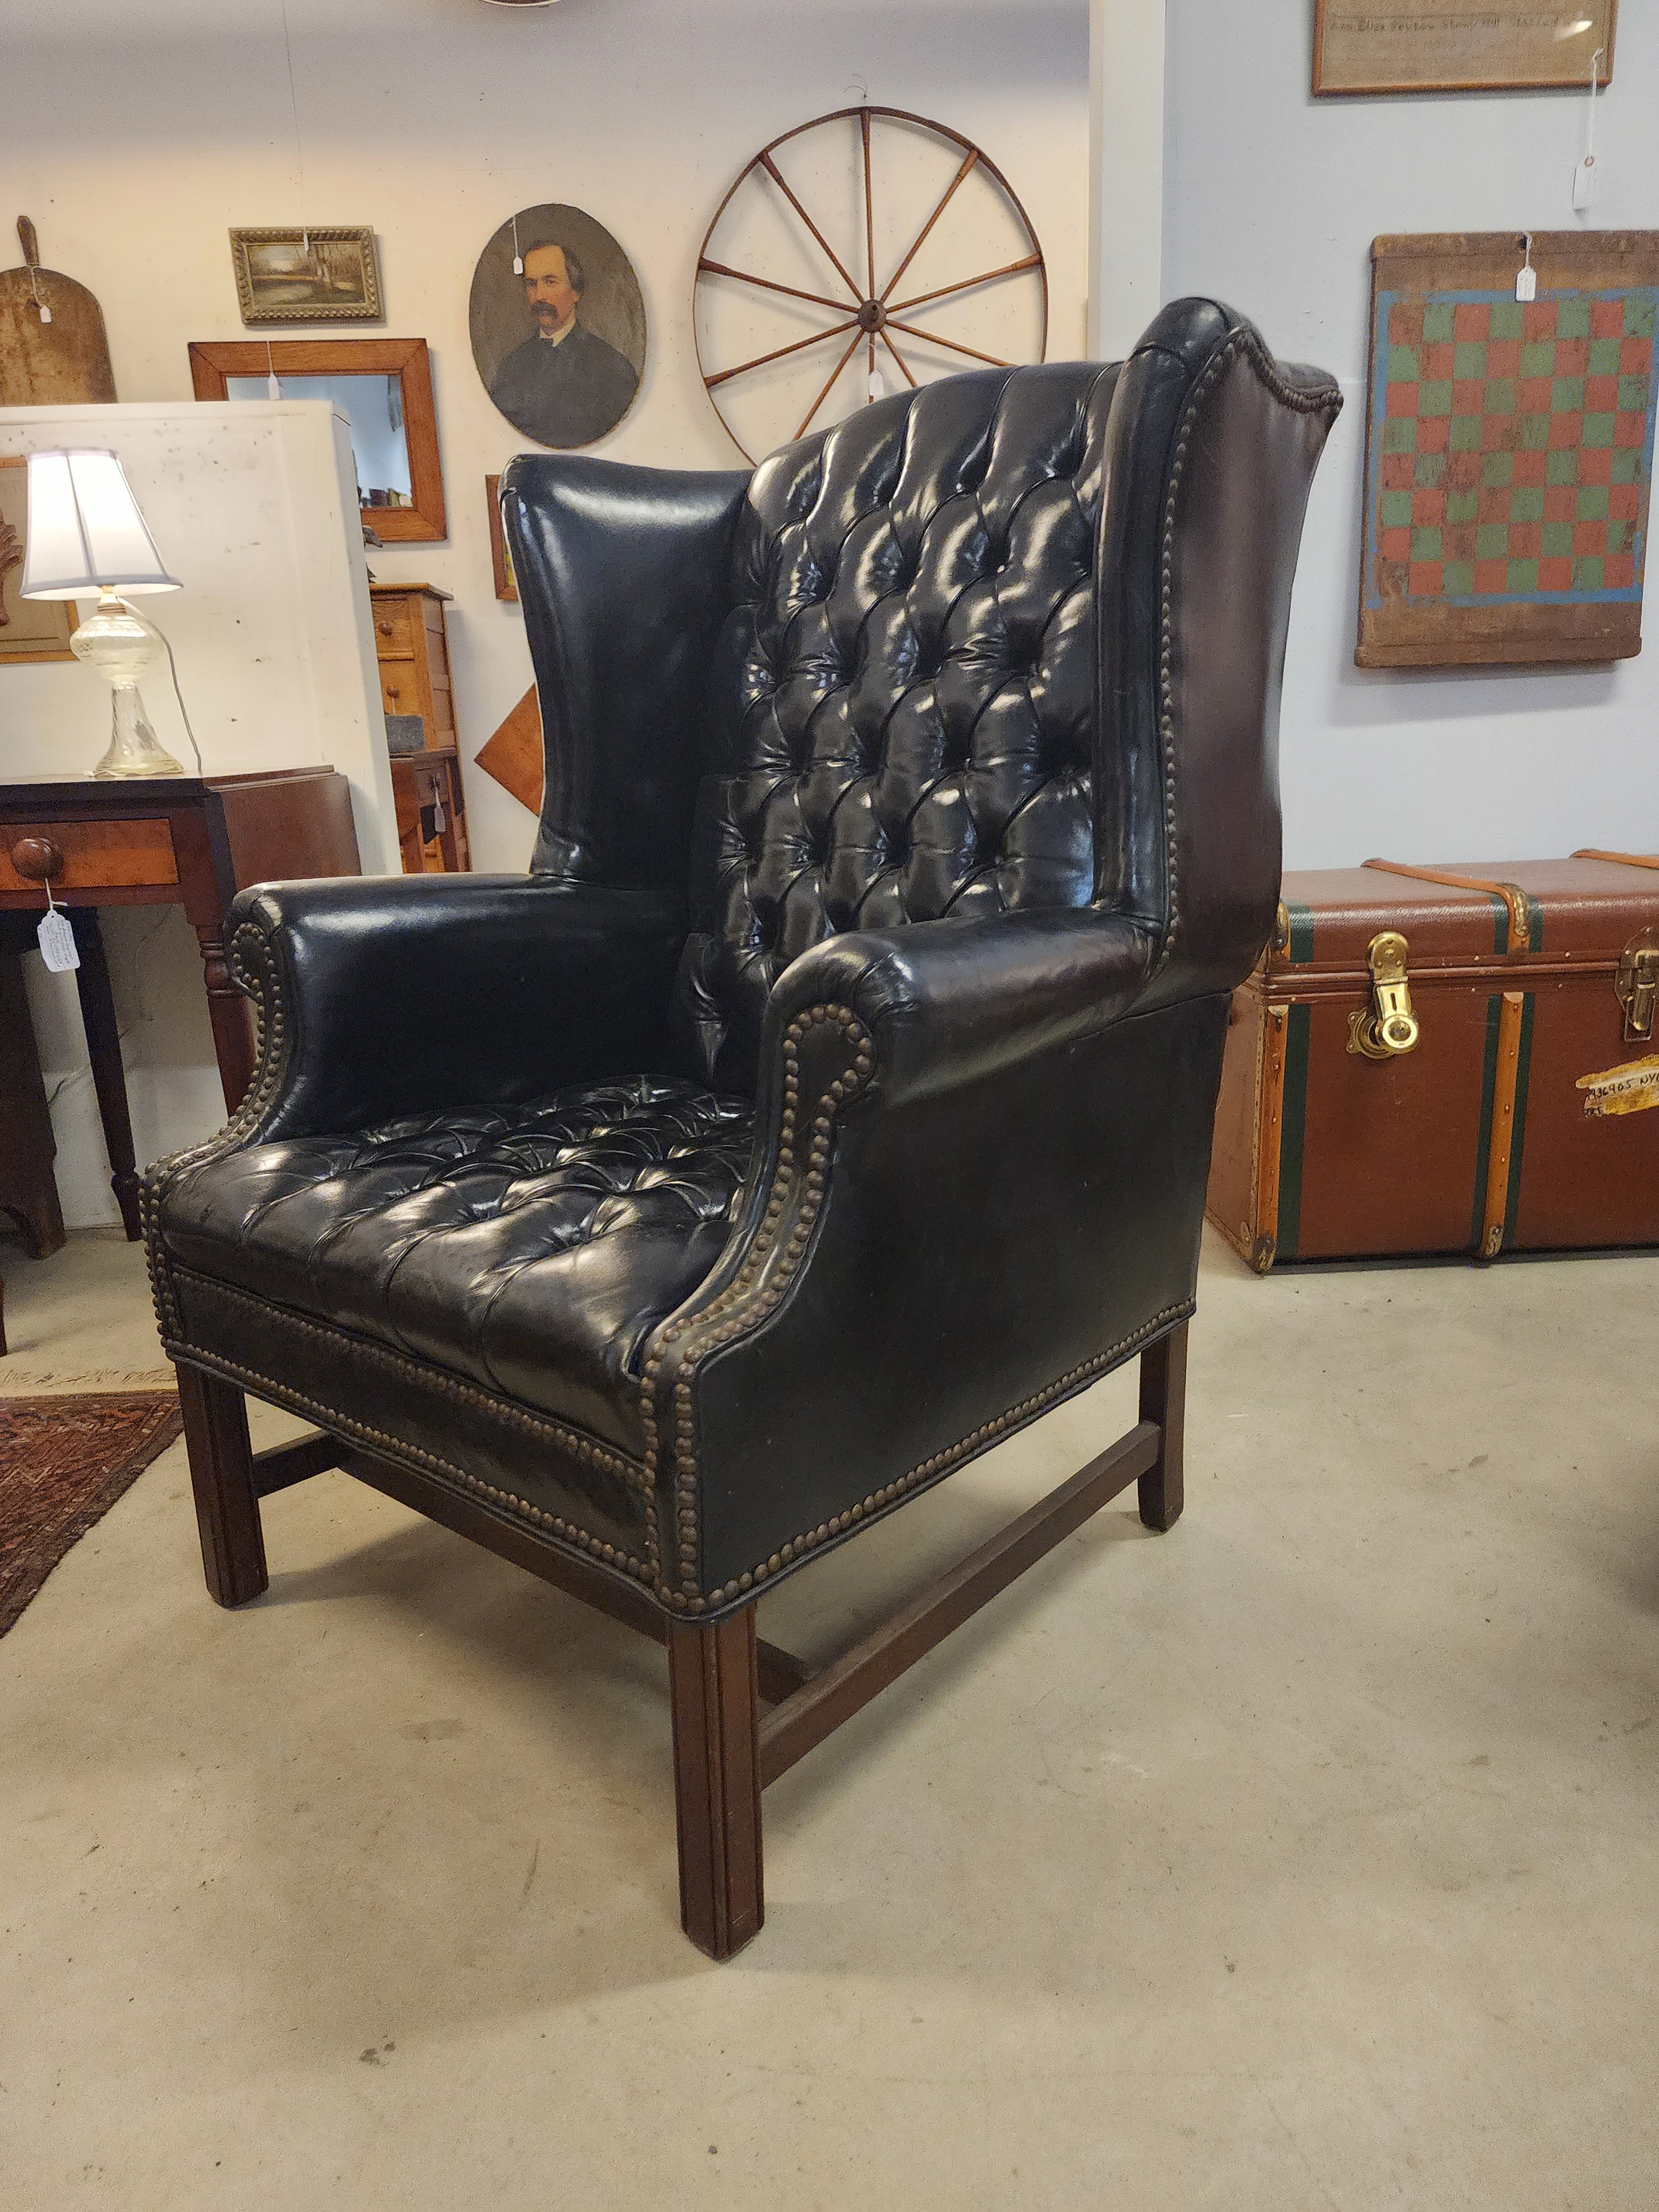 Great black leather wing back chair with lots of personality. Tufted and buttoned with beautiful nail head work. Comfortable strong and an excellent vintage condition. Would add sculptural presents to any room in your home.